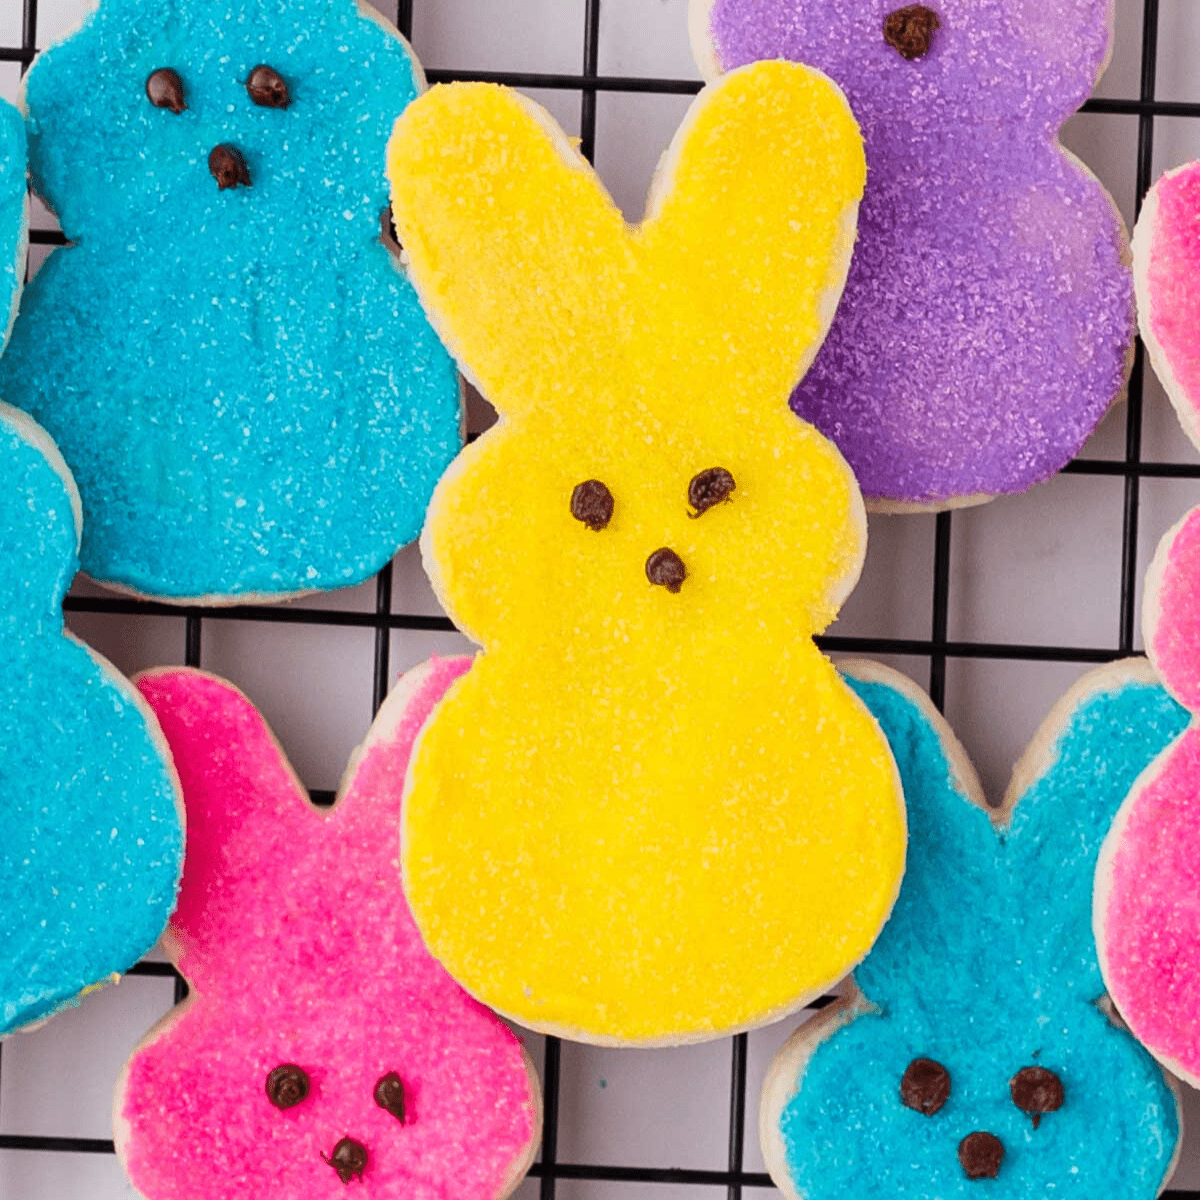 https://thefirstyearblog.com/wp-content/uploads/2023/03/Peeps-Bunny-Cookies-Square.png